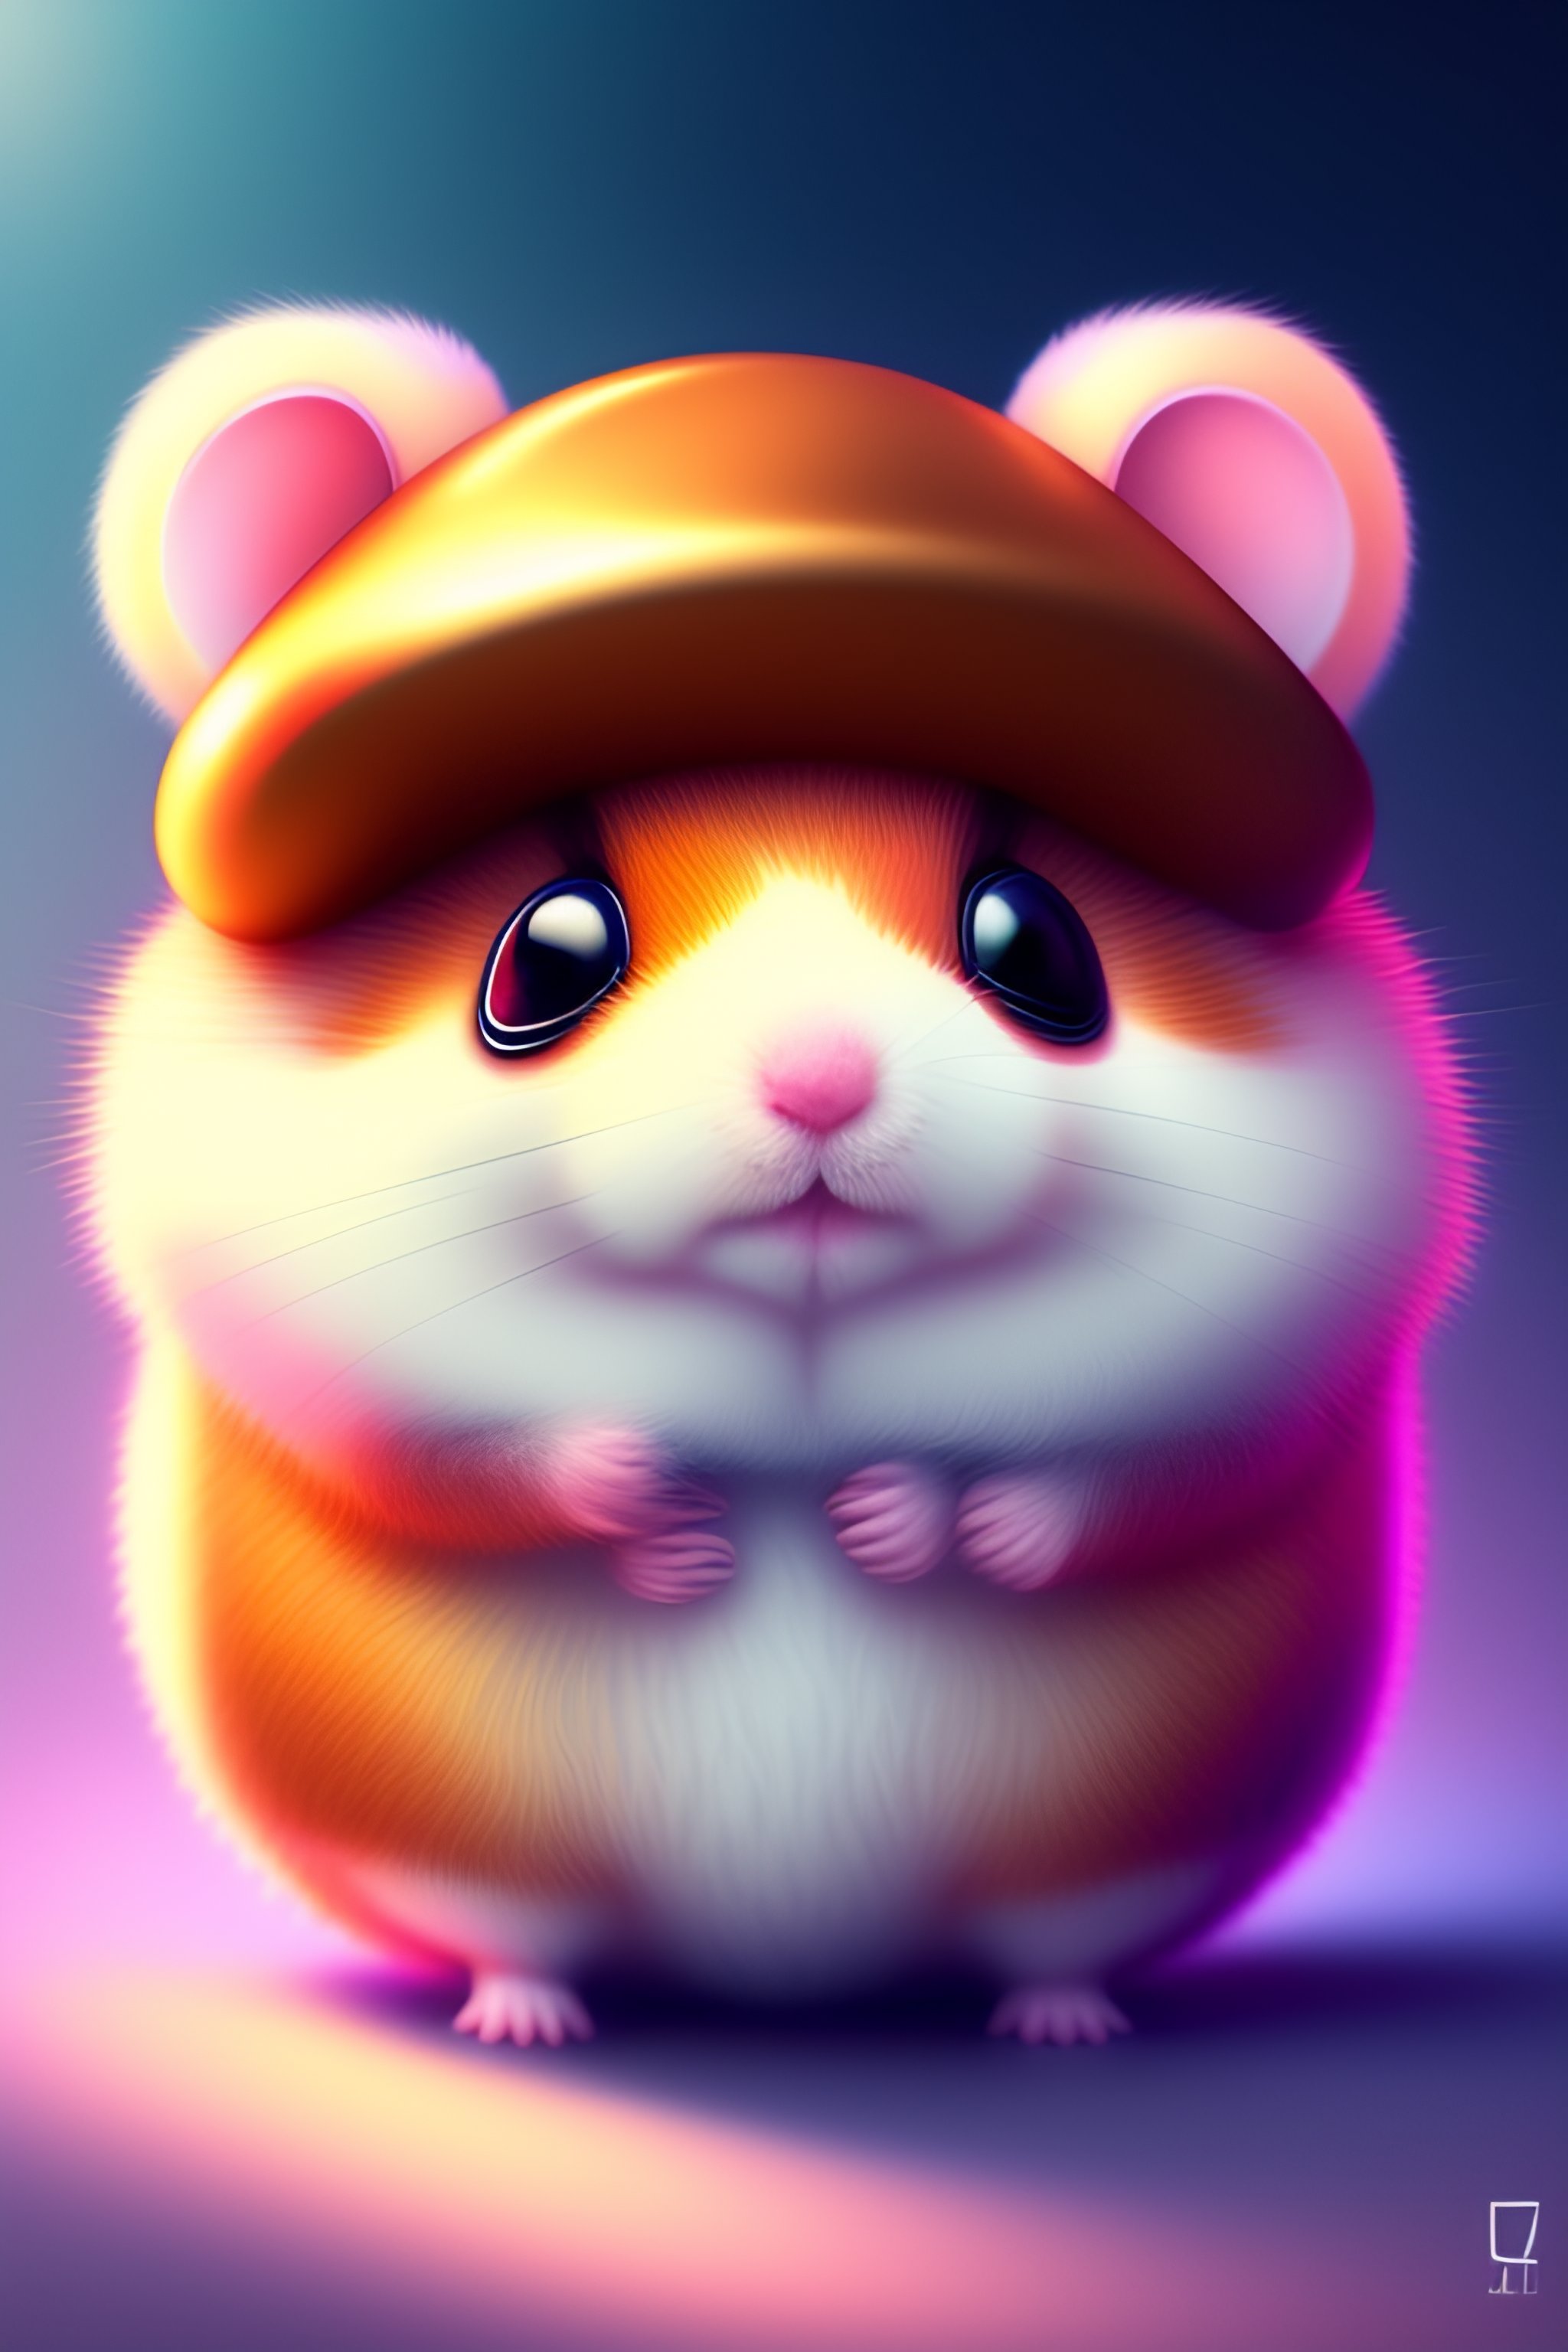 Lexica - CUTE AND ADORABLE CARTOON FLUFFY HAMSTER, HEART, CANDY, SPACE ...